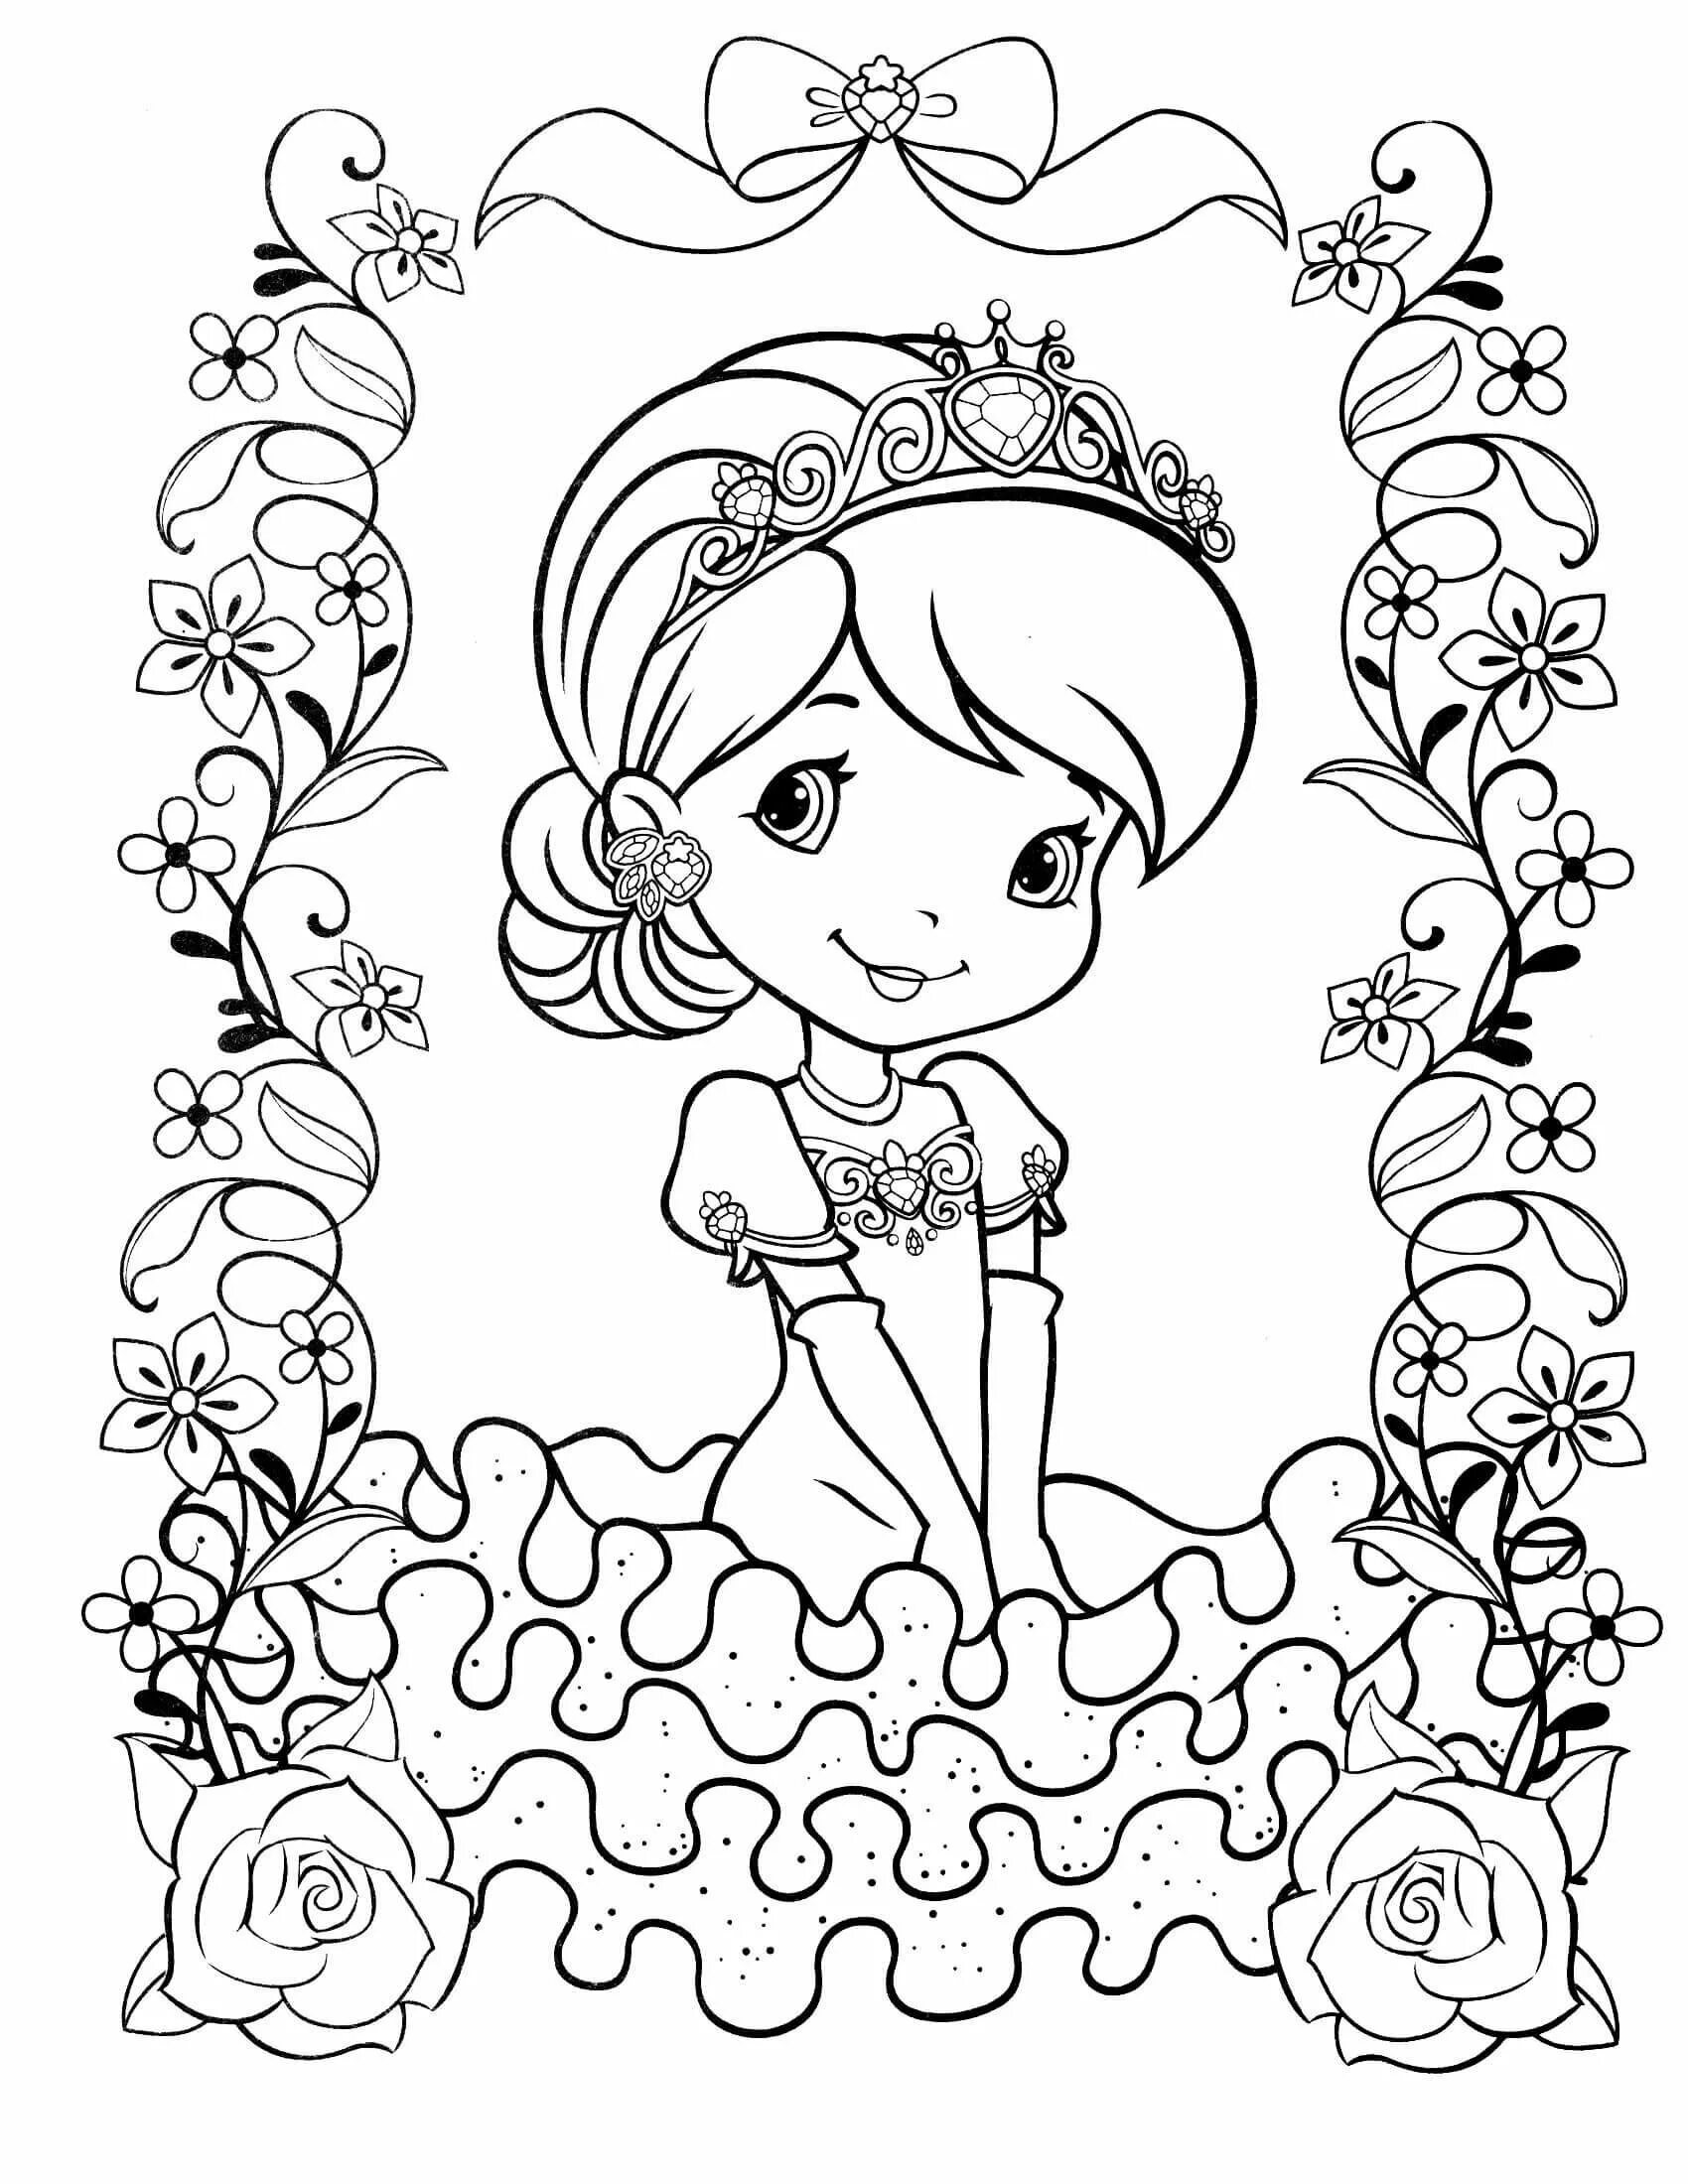 Luxury princess coloring book for kids